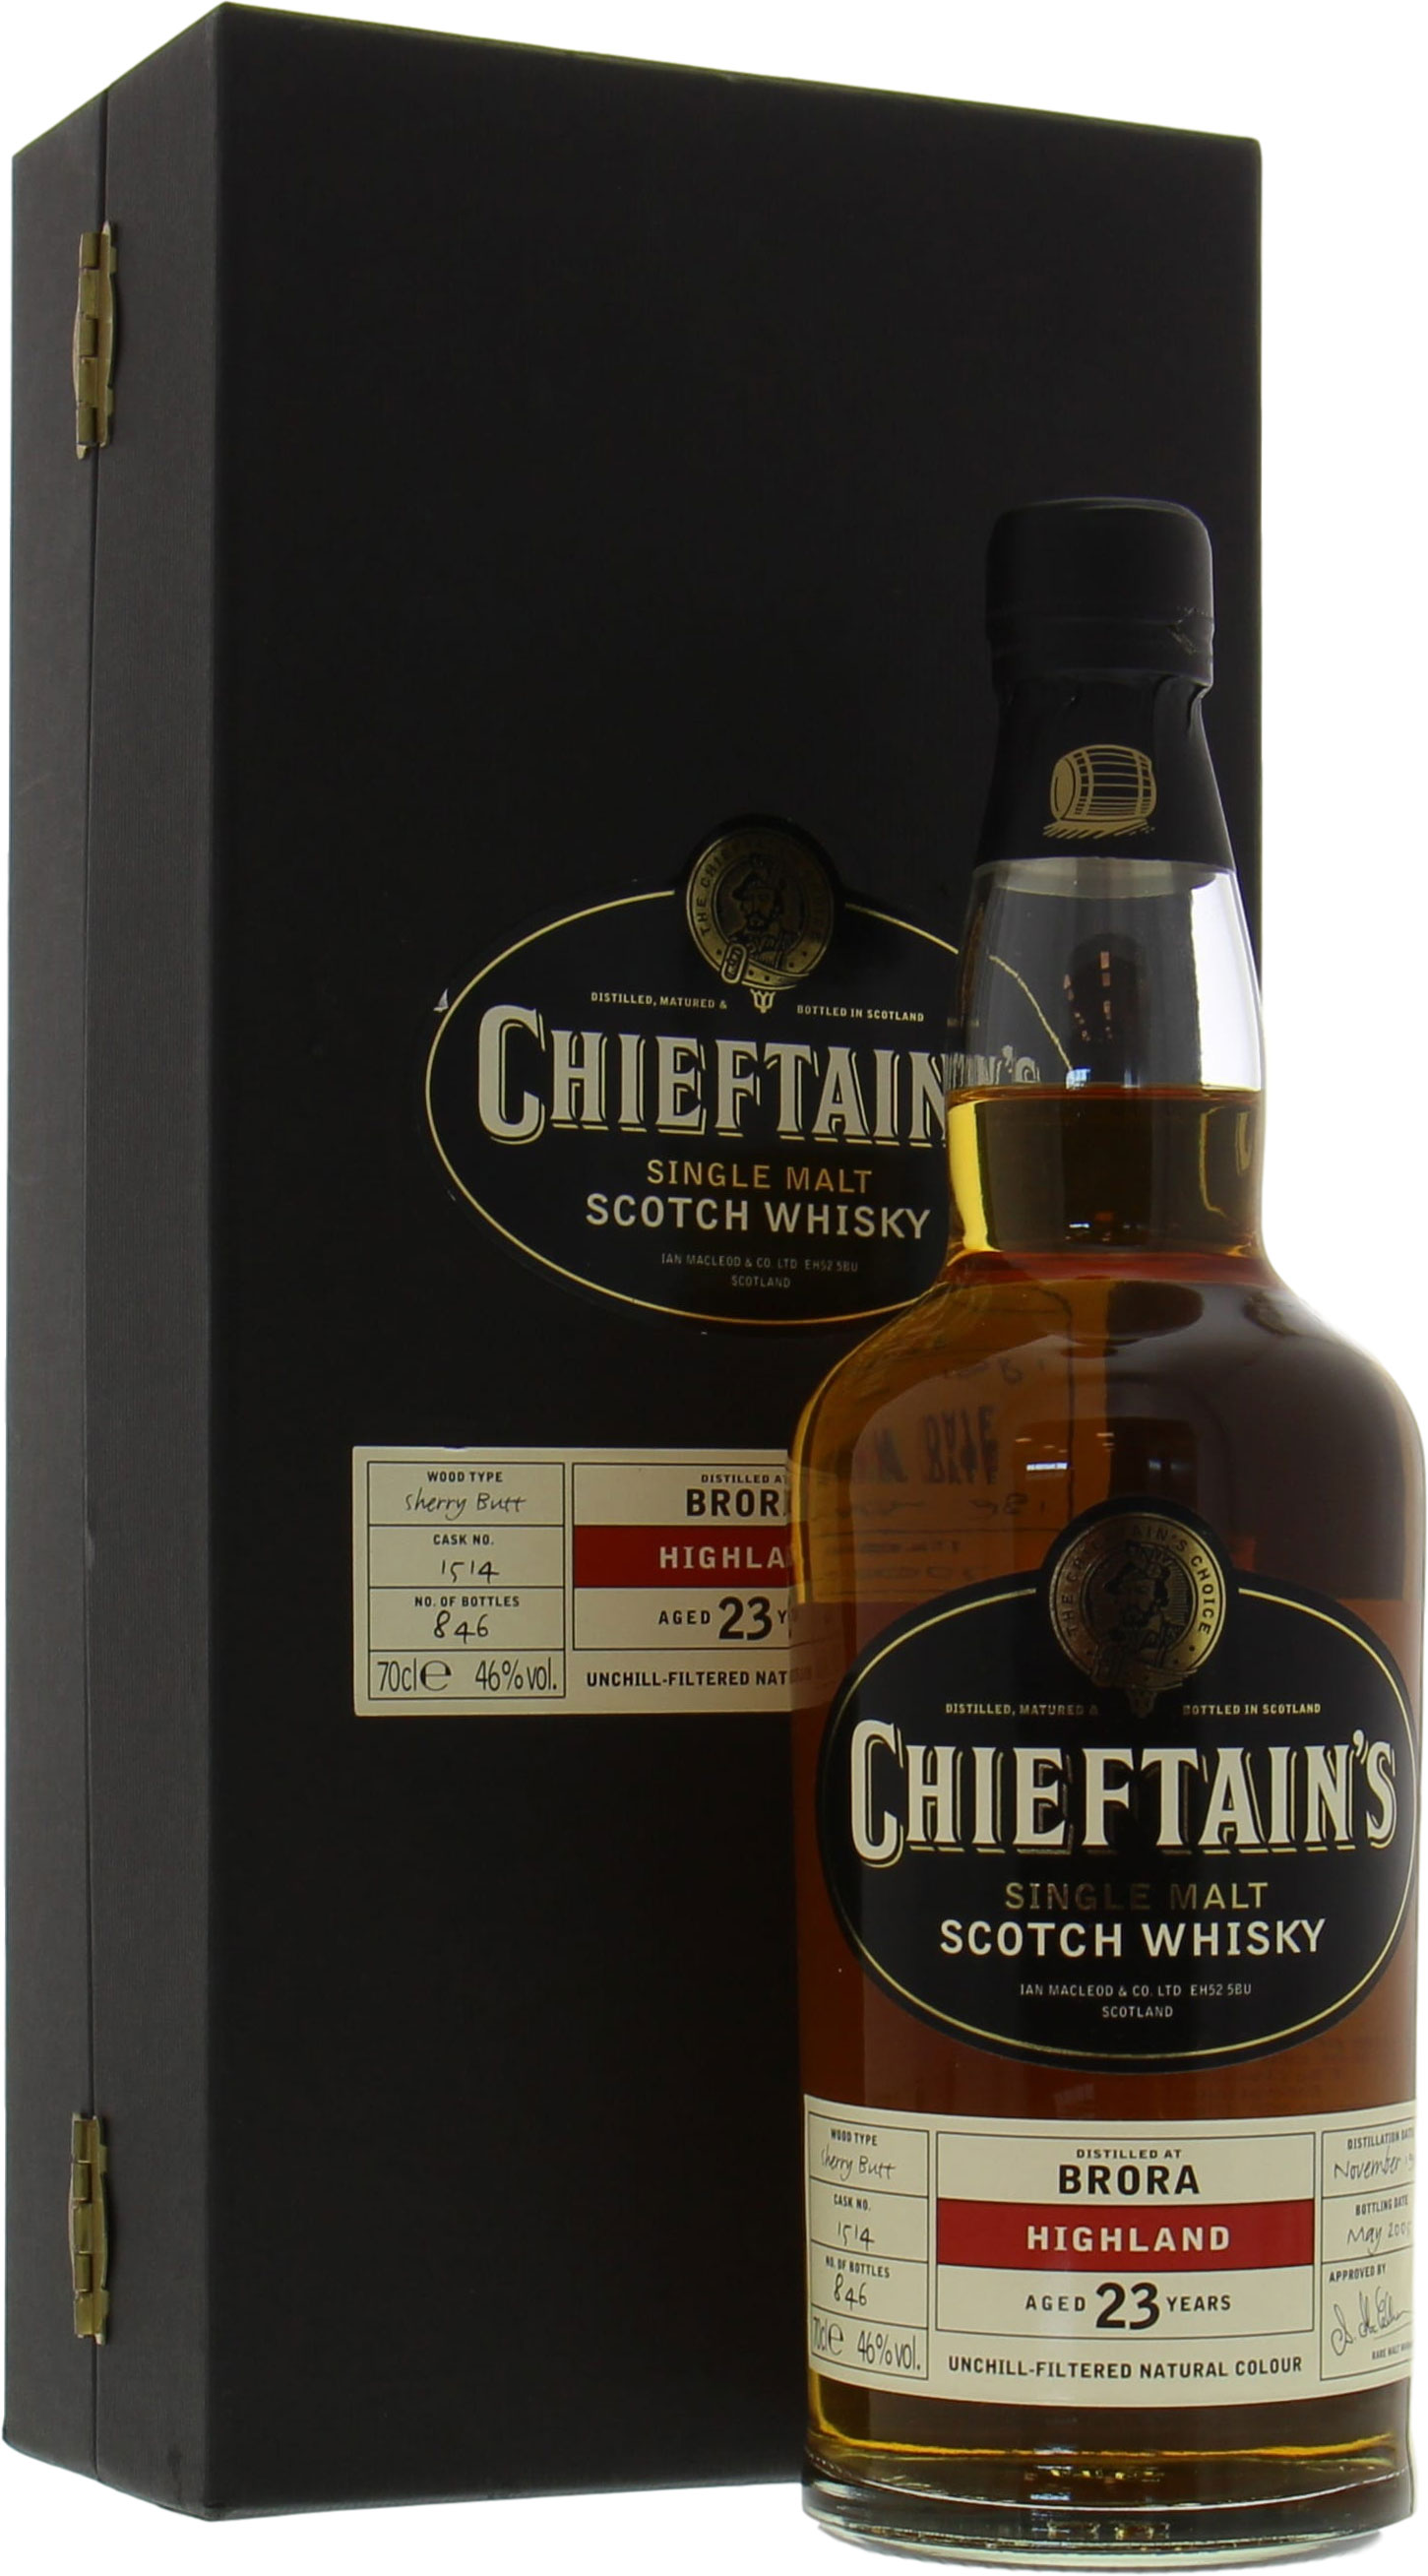 Brora - 23 Years Old Chieftains's Cask:1514 46% 1981